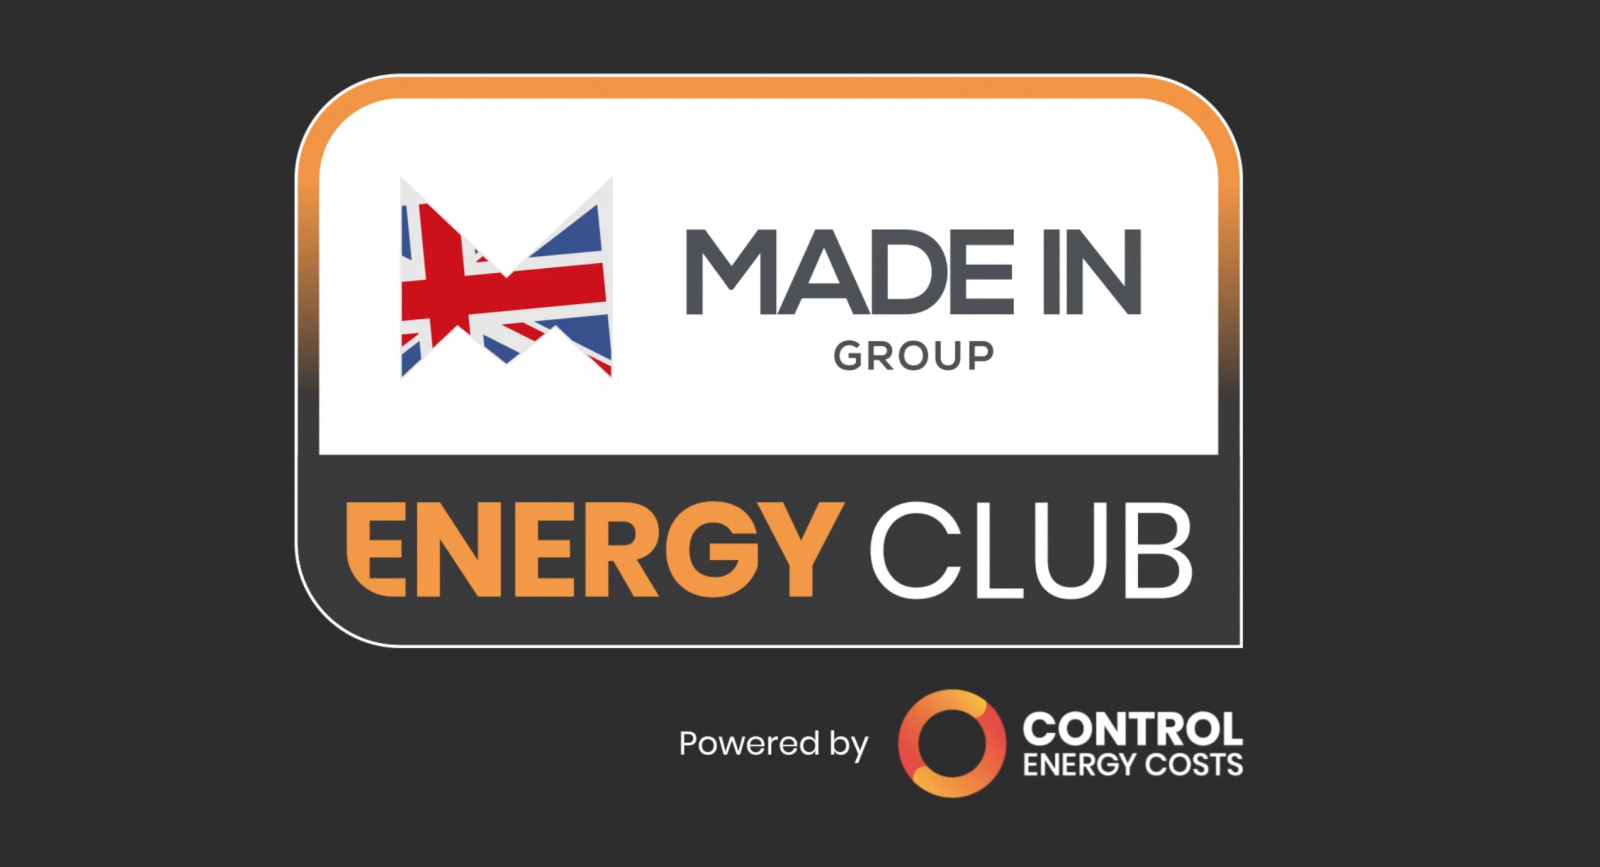 The power of the Made In Group Energy Club